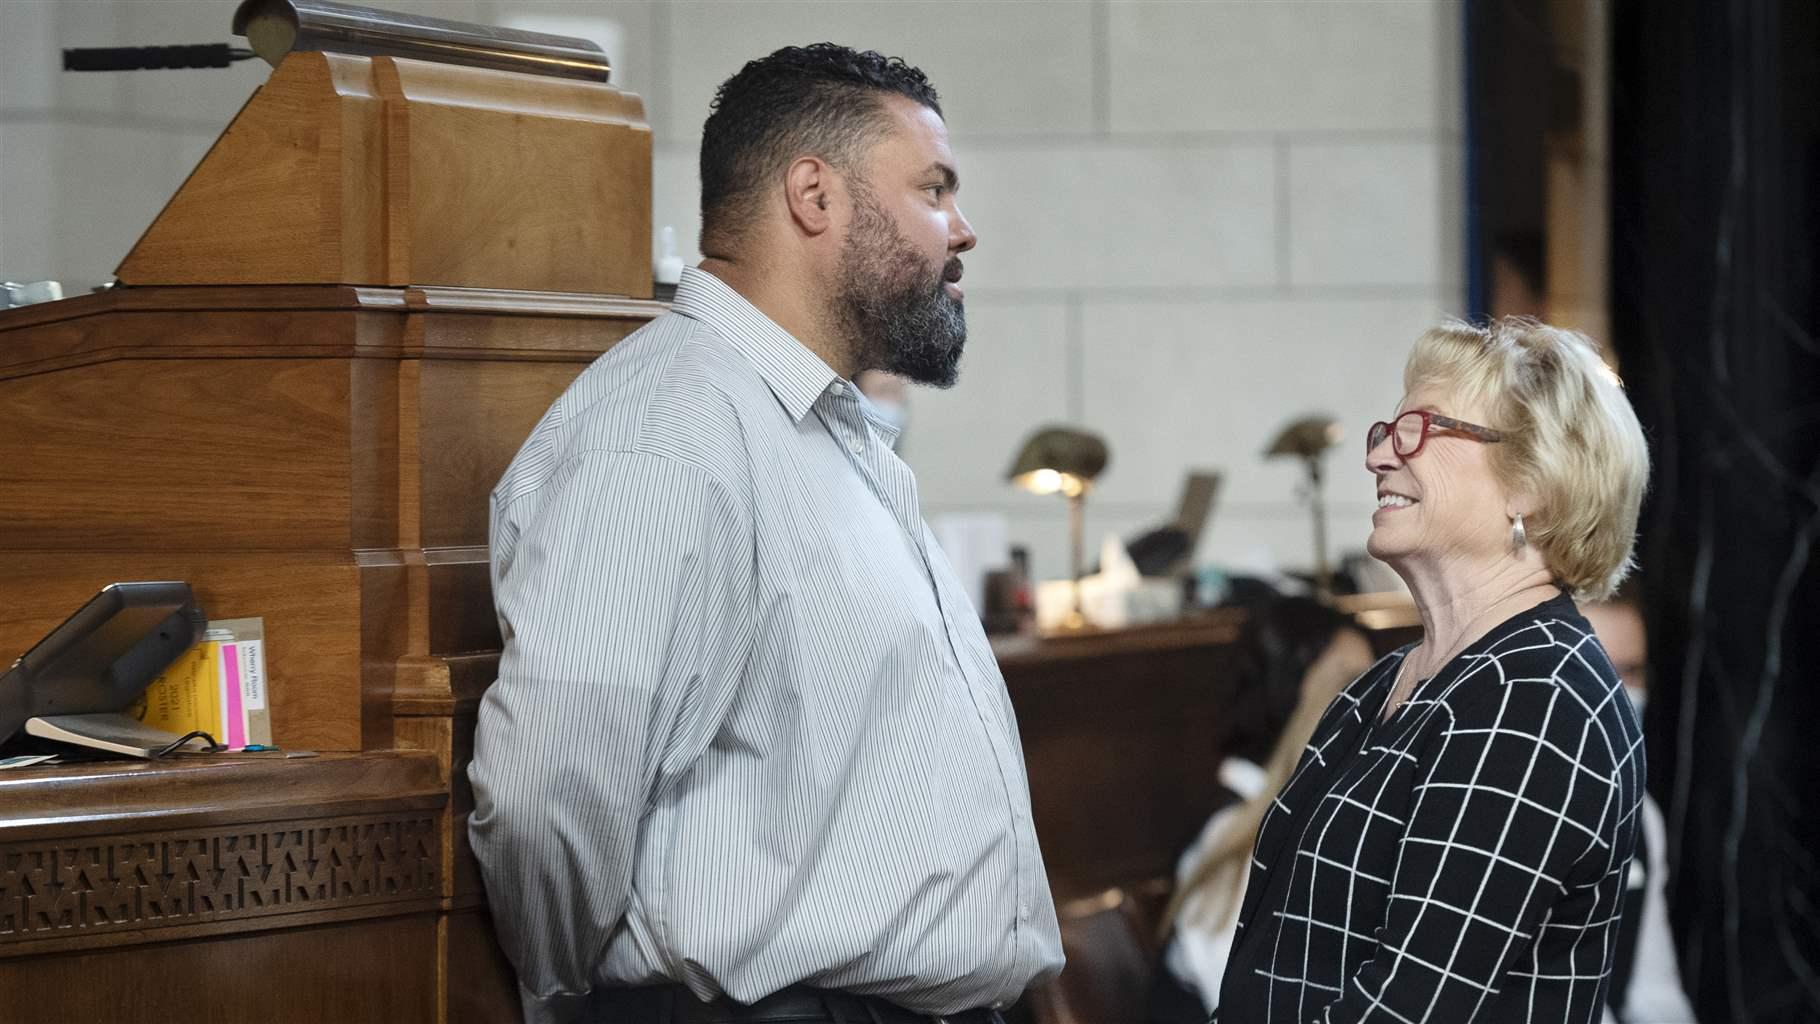 Nebraska state Sen. Justin Wayne talks with Sen. Lou Ann Linehan during the first day of the special session on redistricting, Monday, Sept. 13, 2021, in Lincoln, Neb